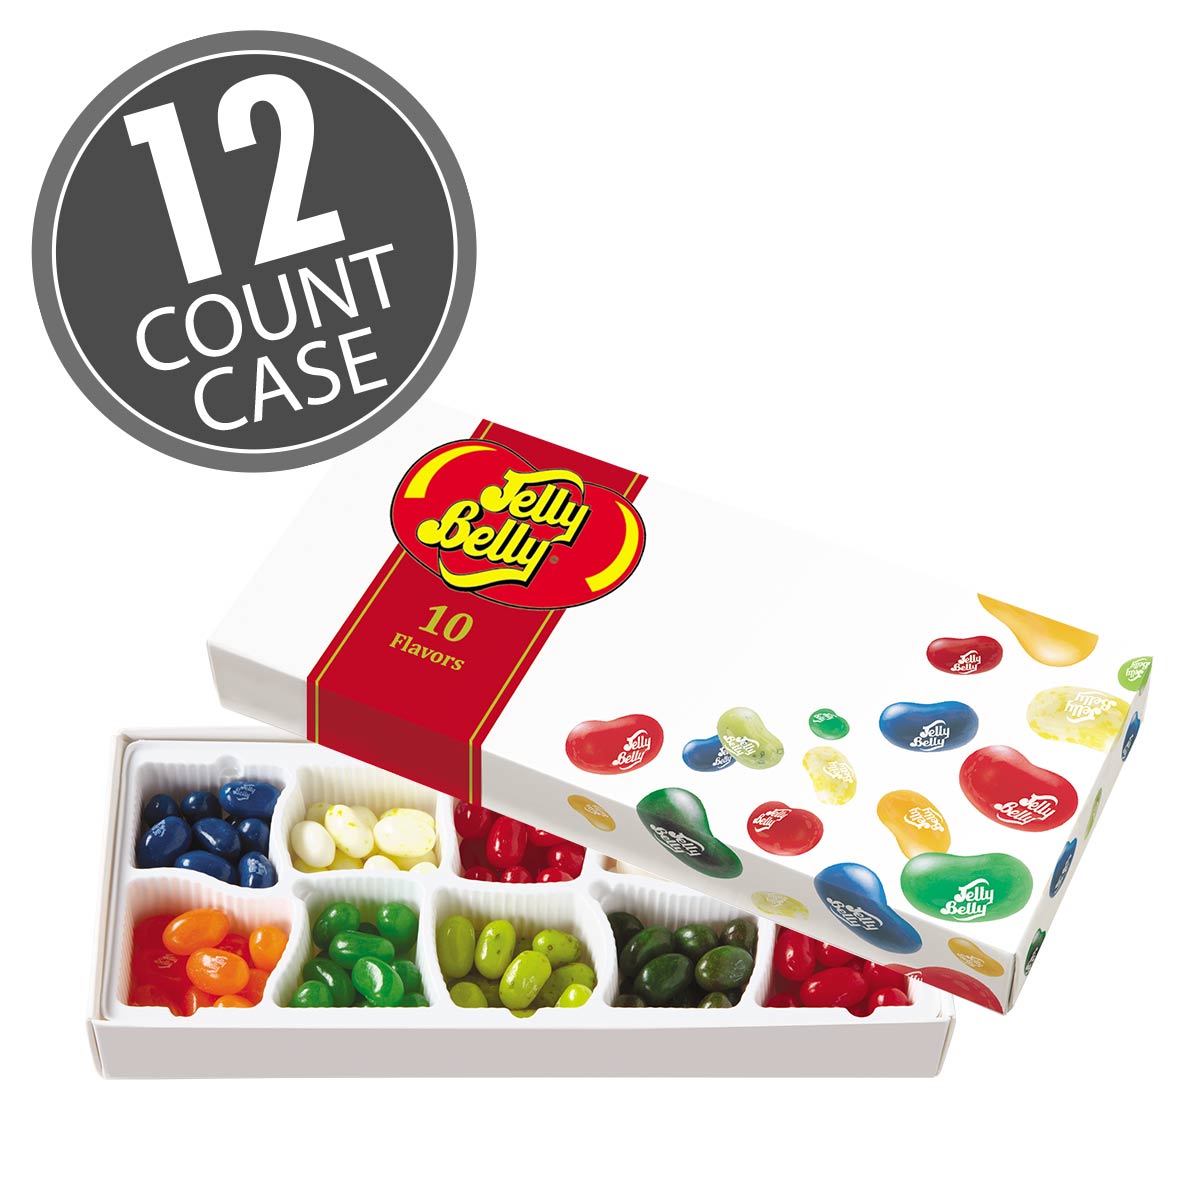 Jelly Belly 10-Flavor Gift Box. Assorted flavors like Buttered Popcorn; Very Cherry and more. Great present for candy fans.